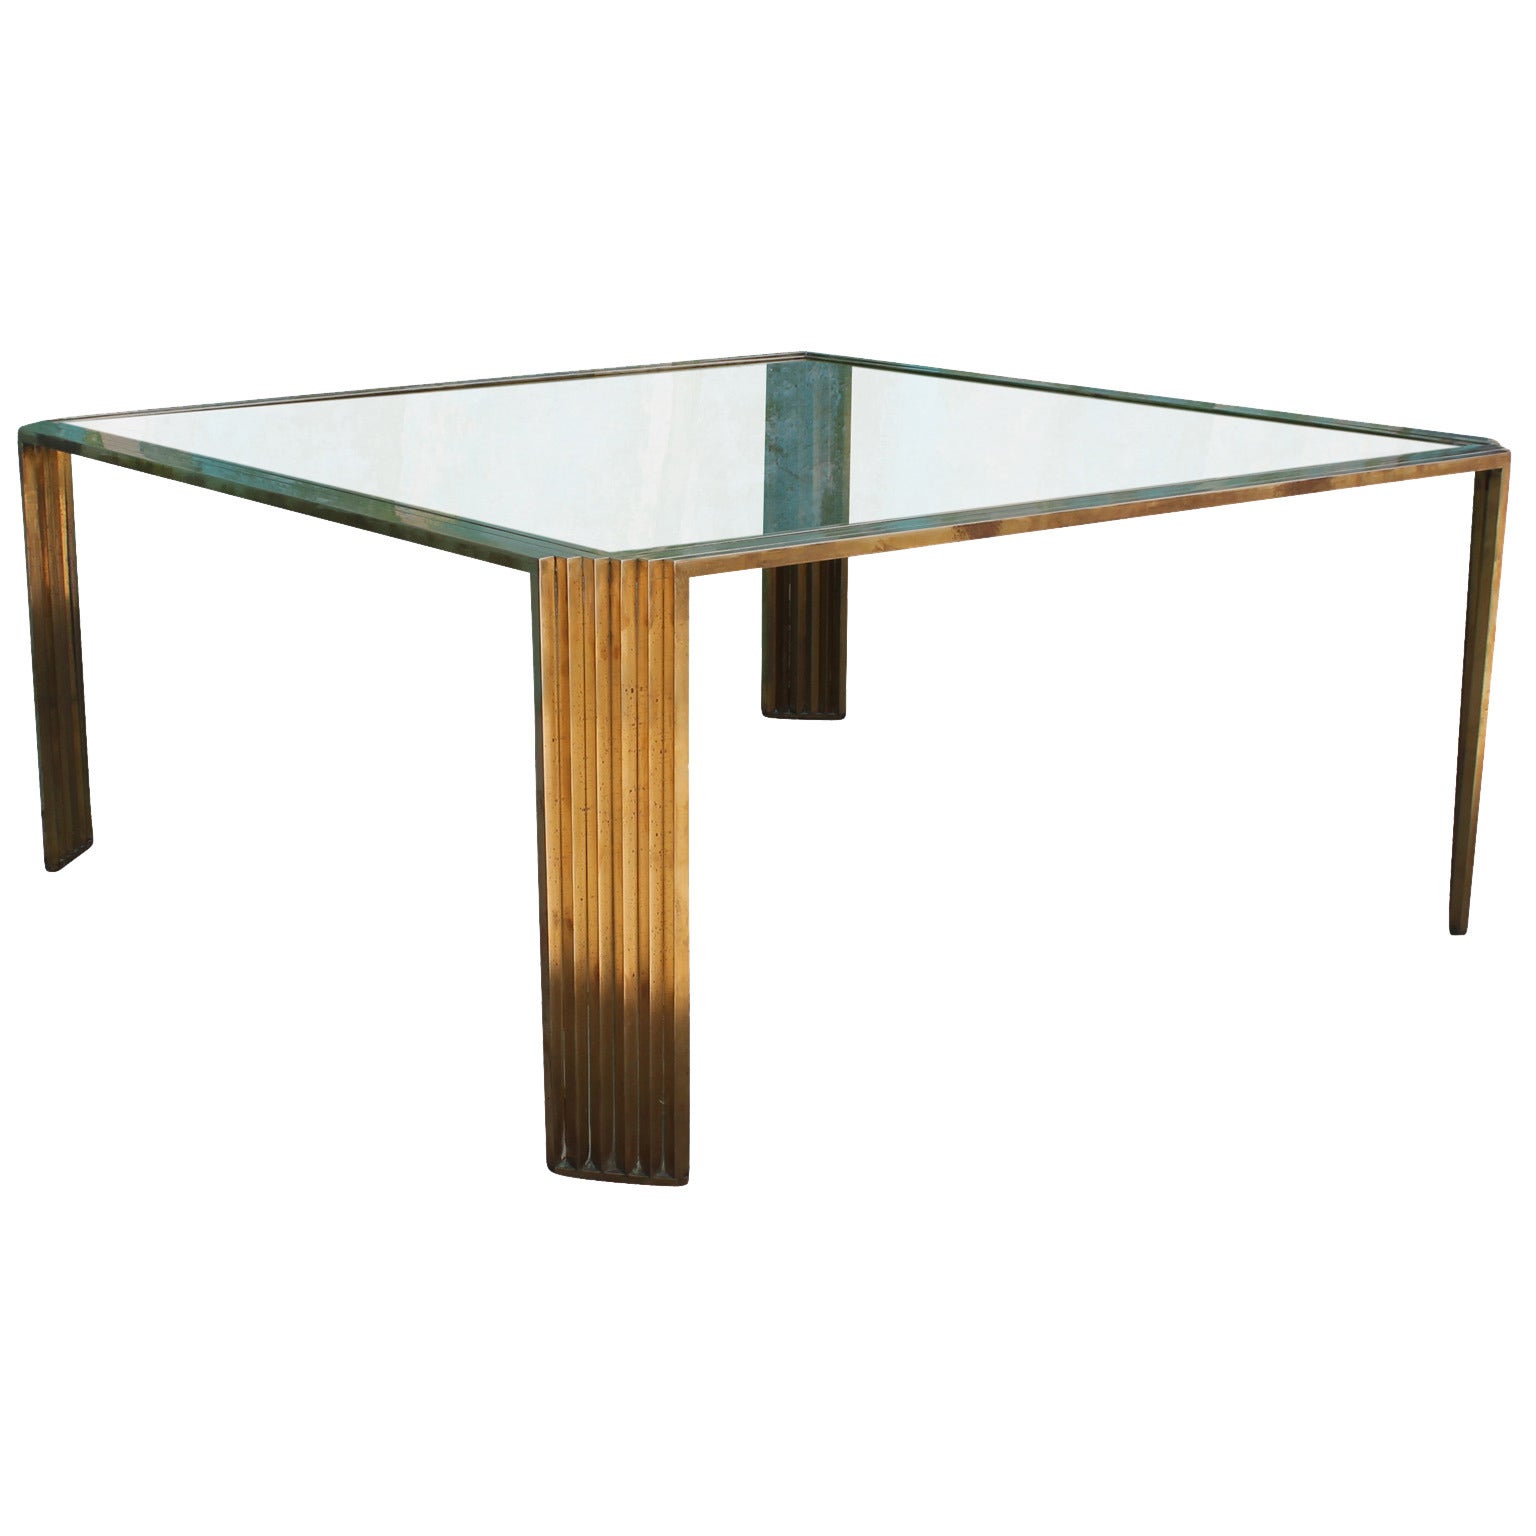 Hollywood Regency Solid Brass Romeo Rega Style Square Table with Glass Top